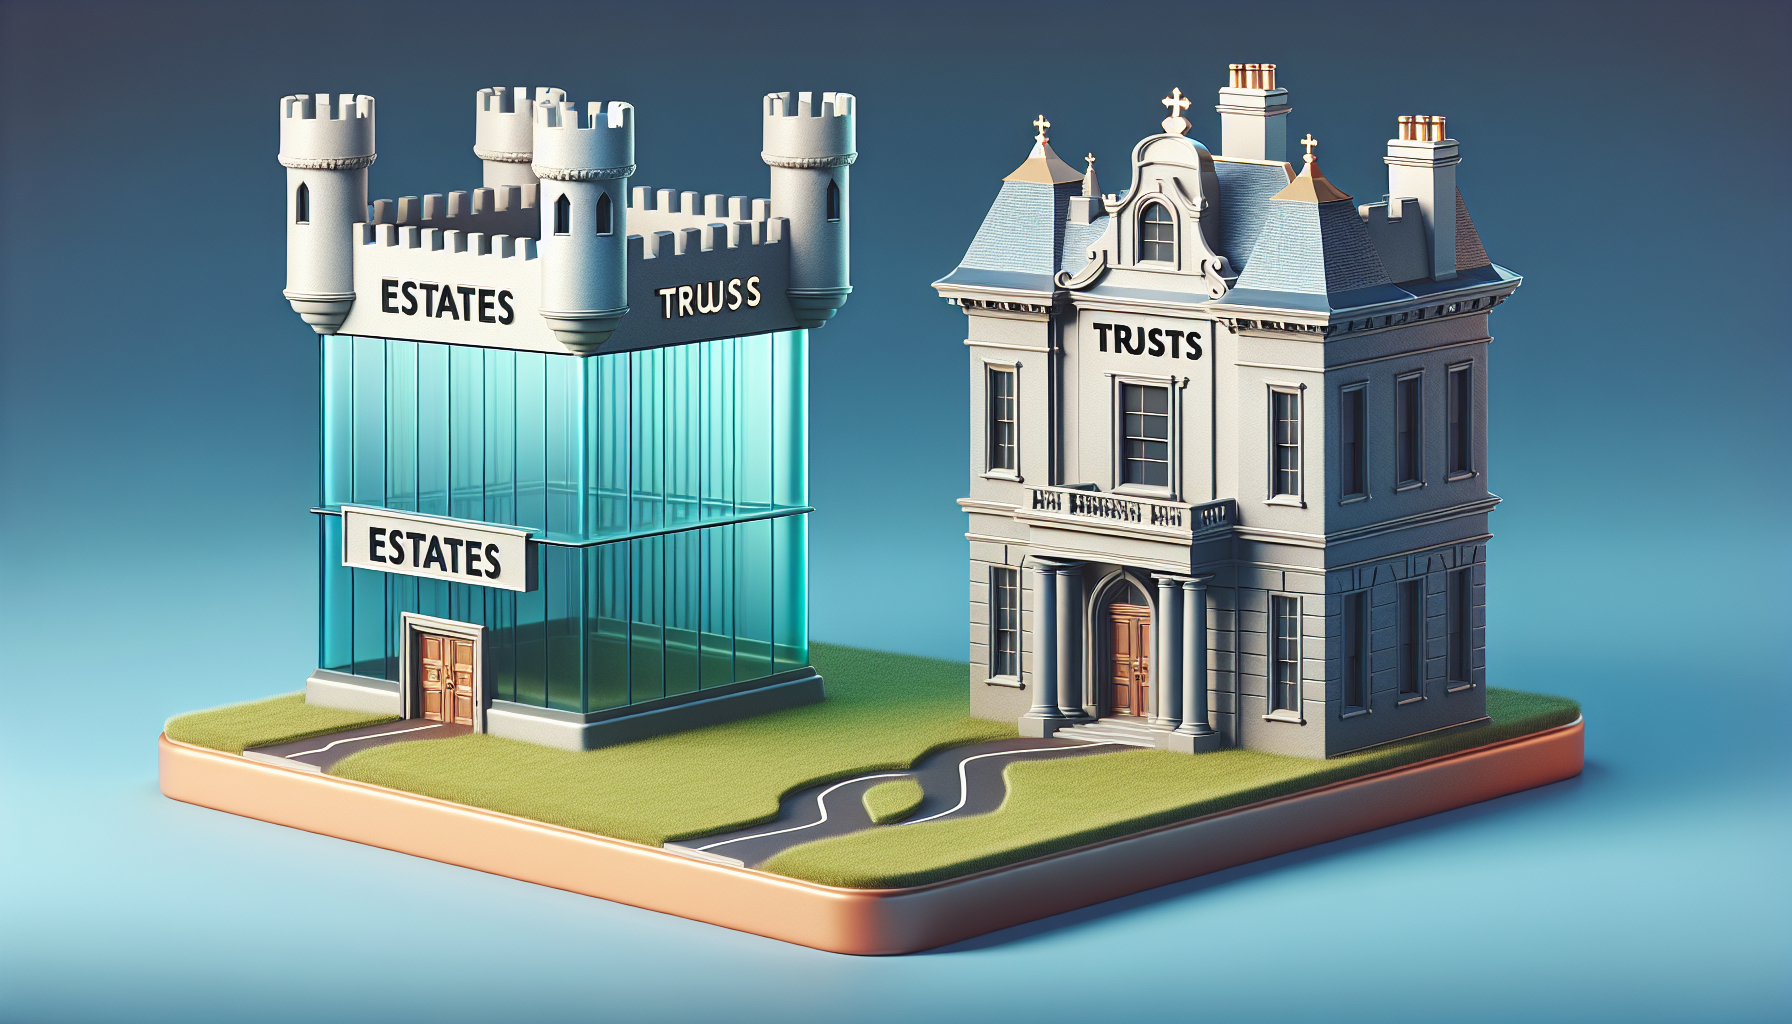 Comparison between estate and trust structures